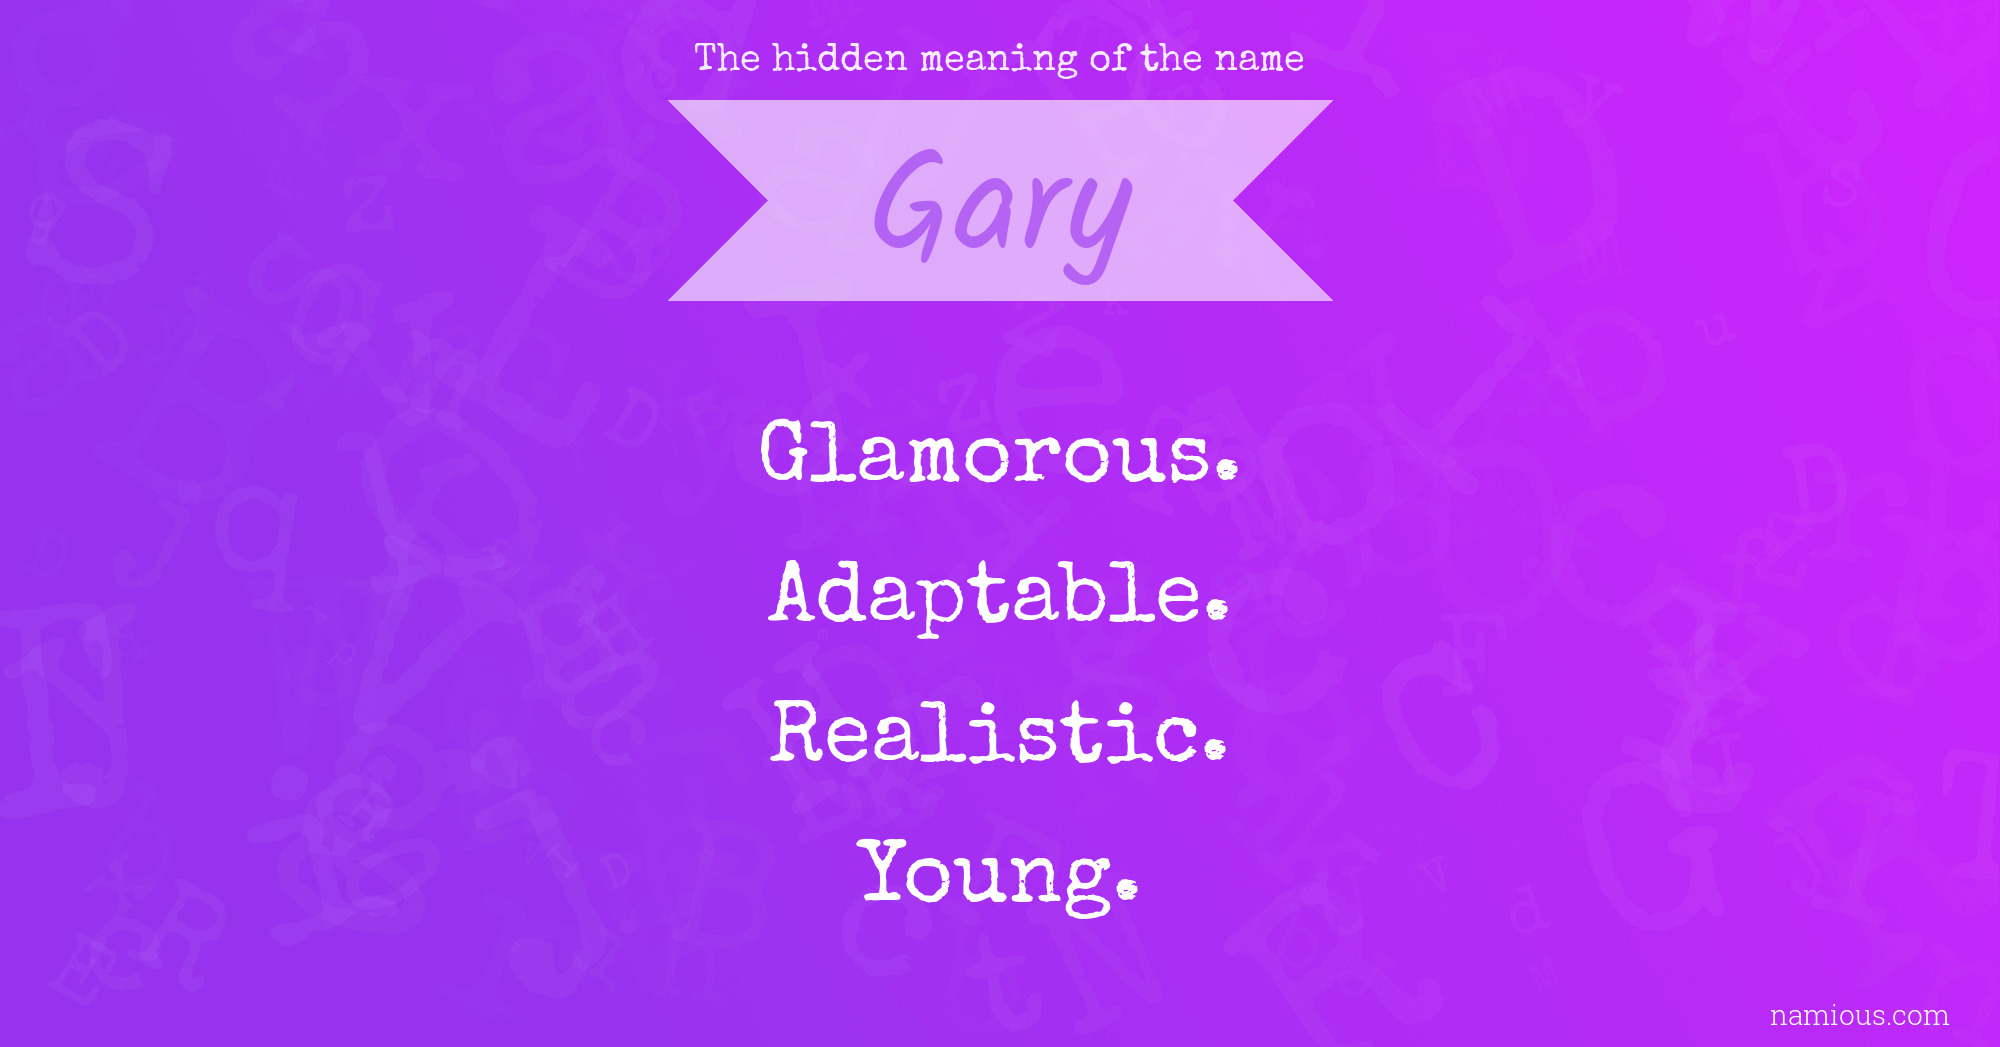 The hidden meaning of the name Gary